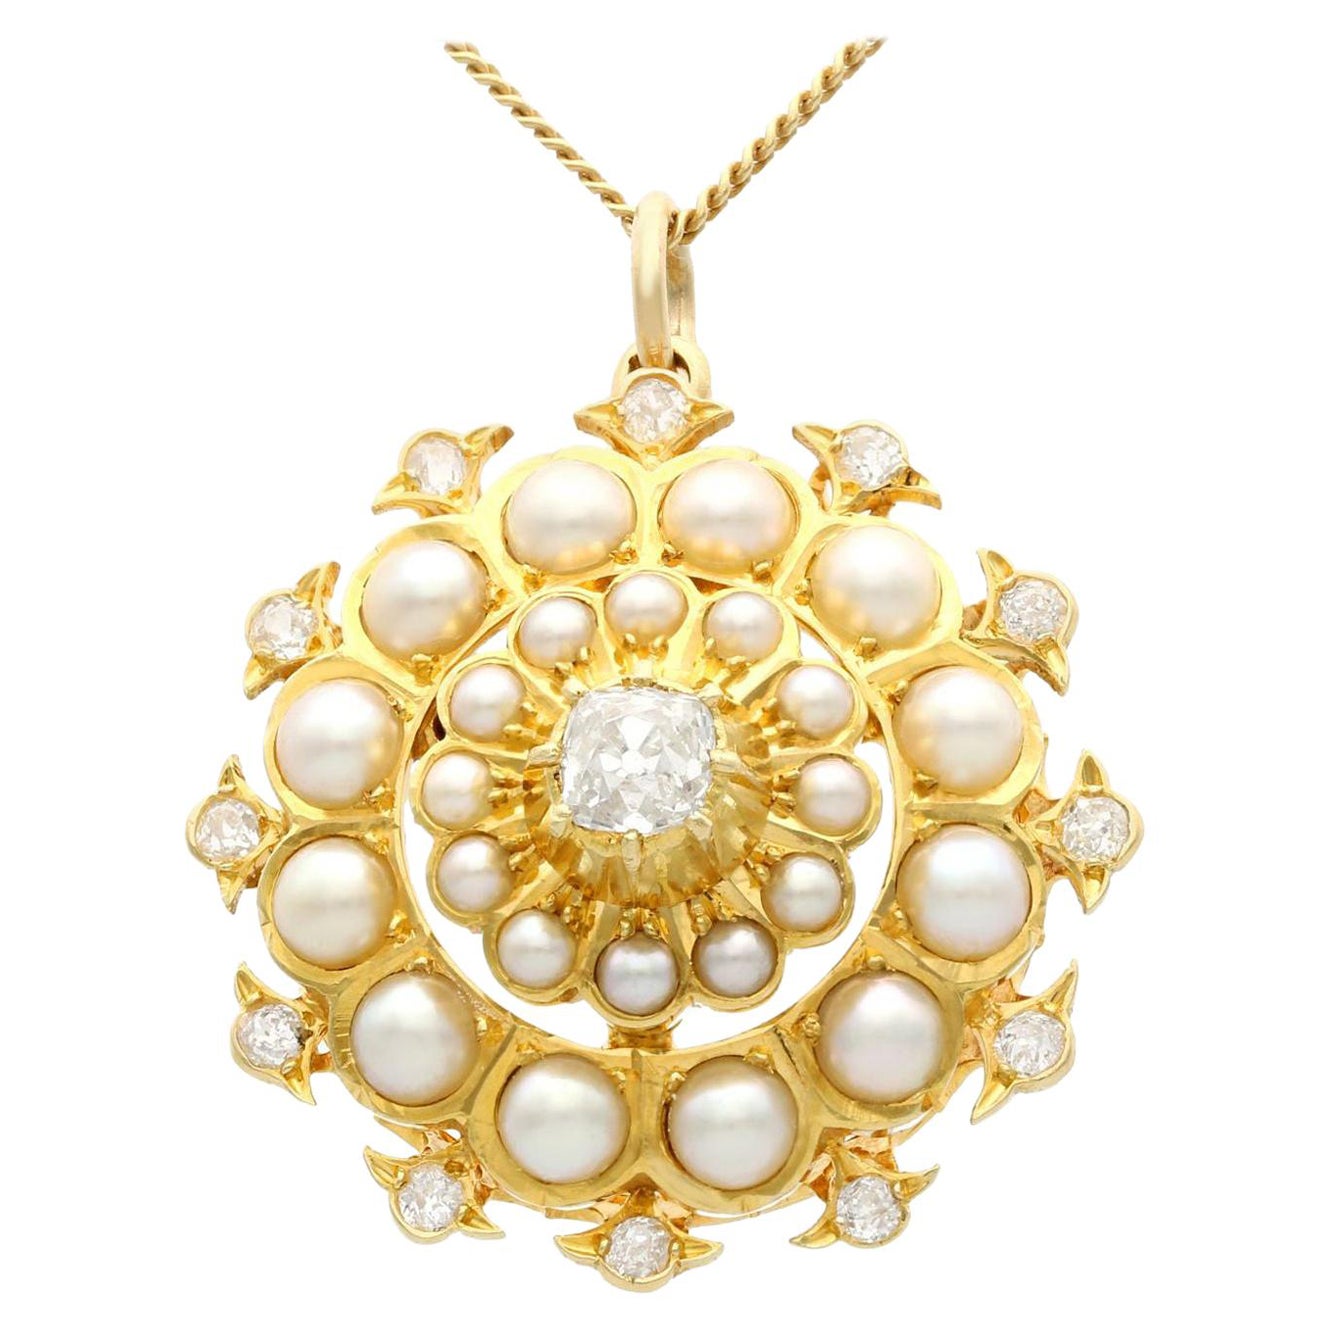 Victorian Seed Pearl and 1.16 Carat Diamond Yellow Gold Pendant Brooch